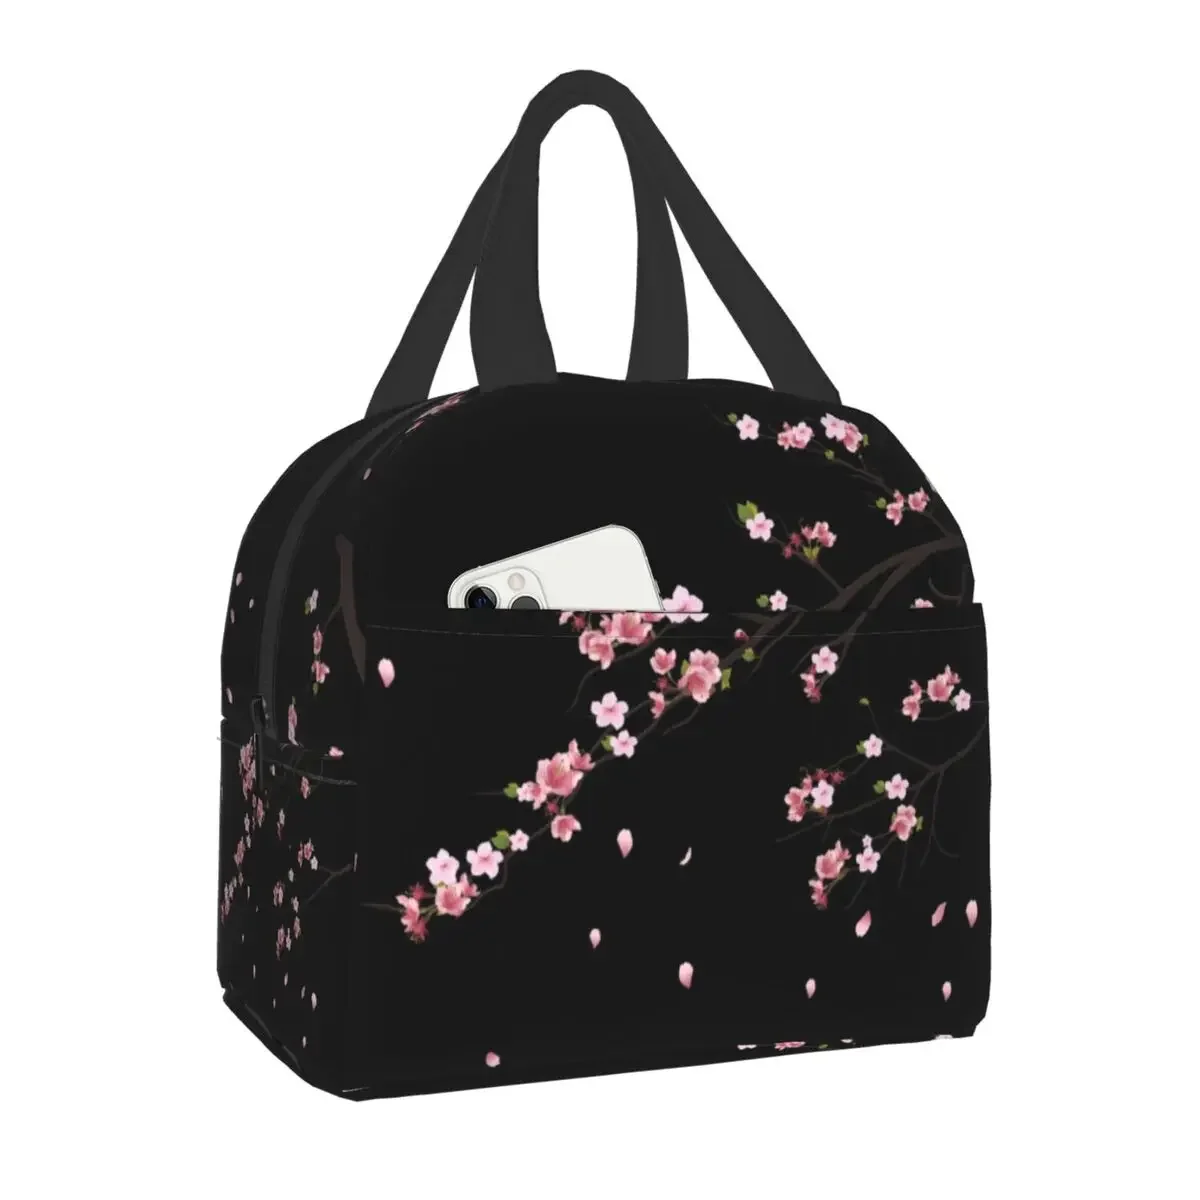 

Sakura Branch Insulated Lunch Bag for Women Portable Waterproof Flower Floral Cherry Blossom Cooler Thermal Bento Box